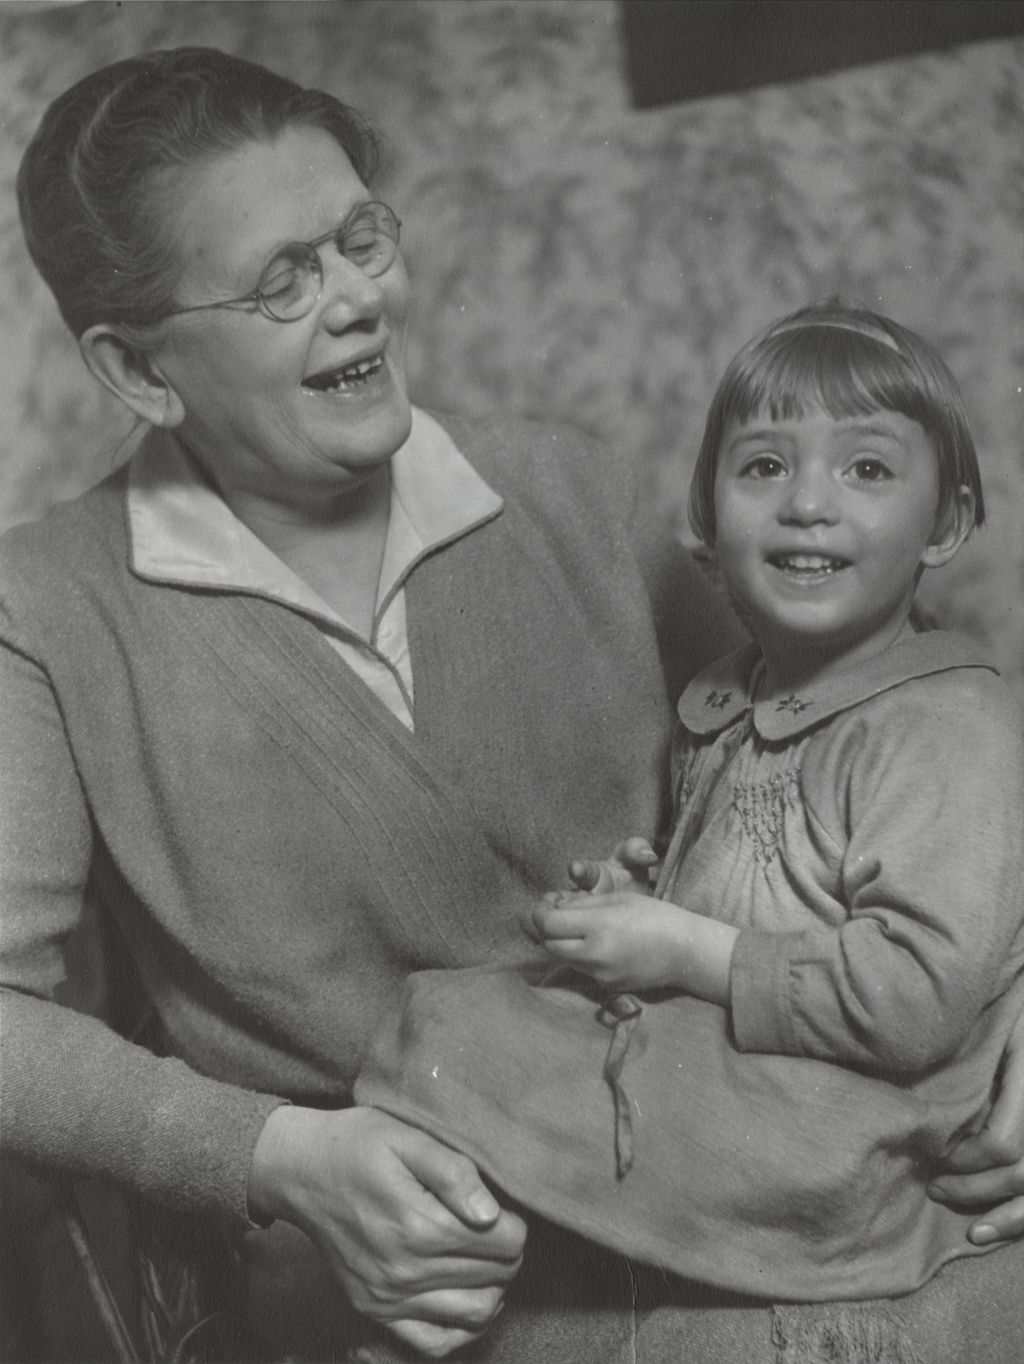 Miniature of Thora Lund with a young girl on her lap